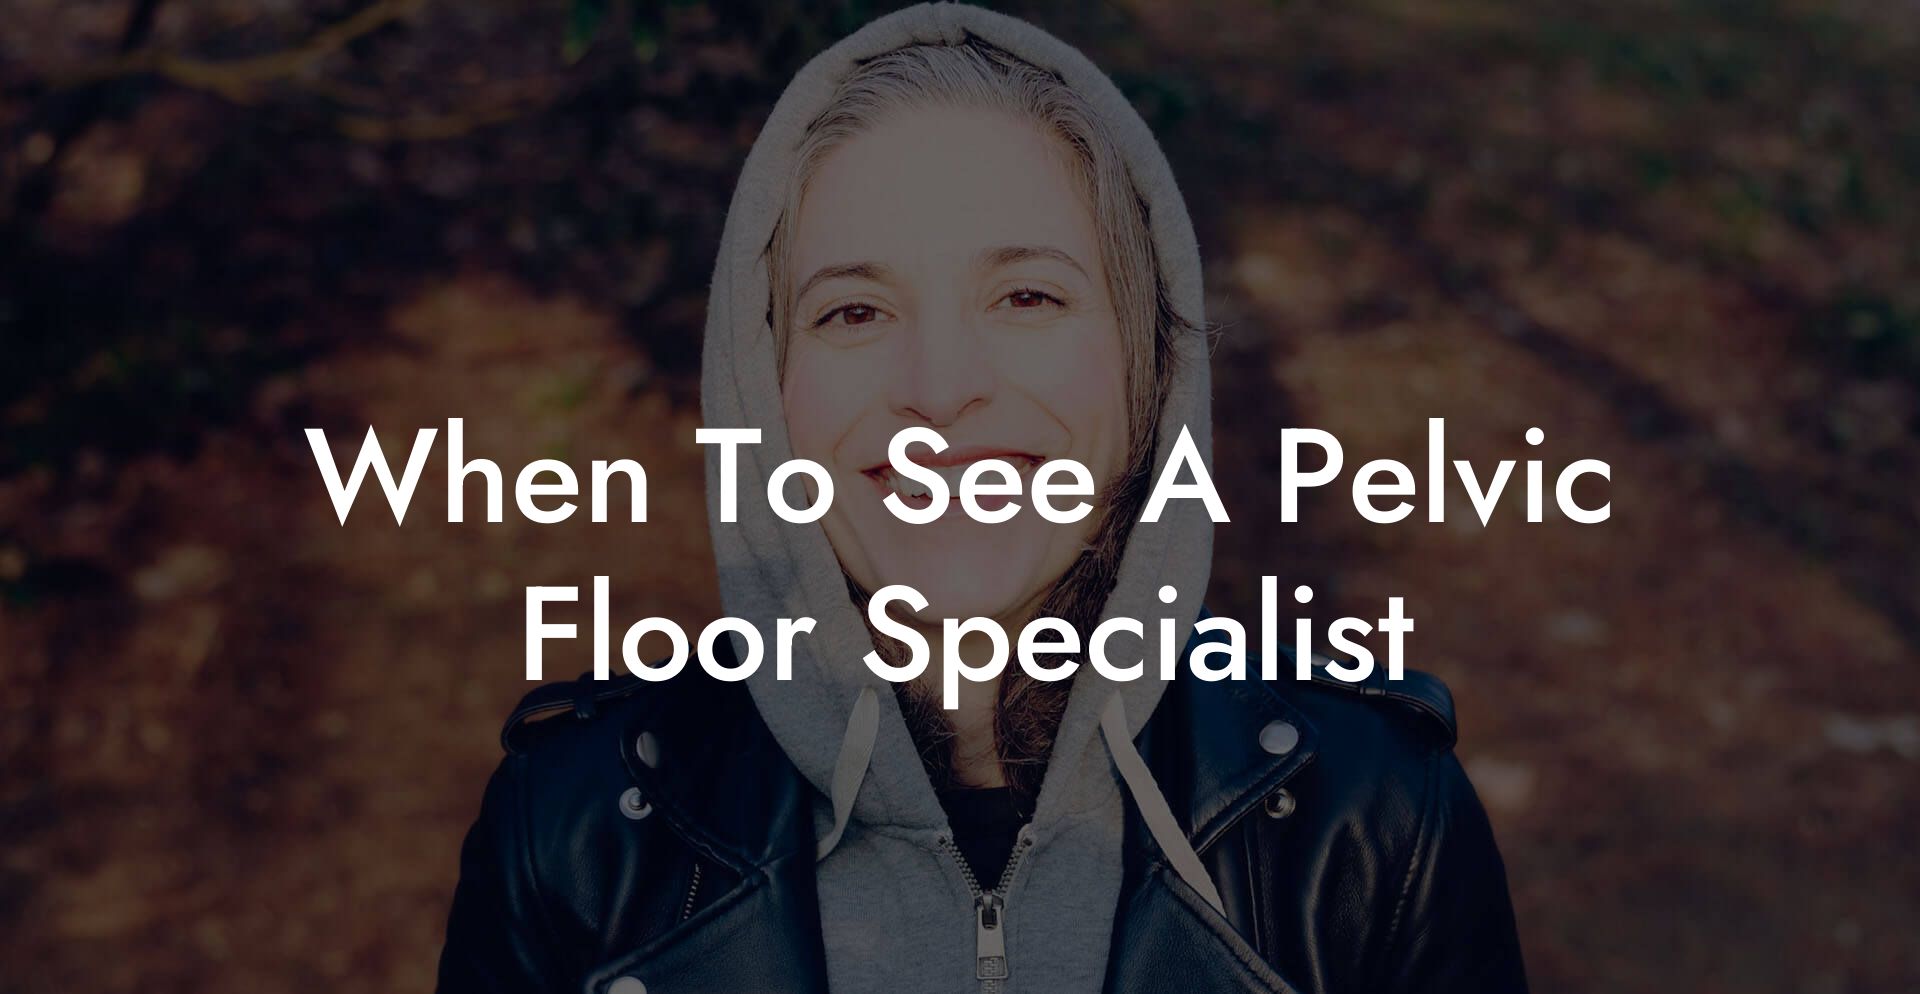 When To See A Pelvic Floor Specialist